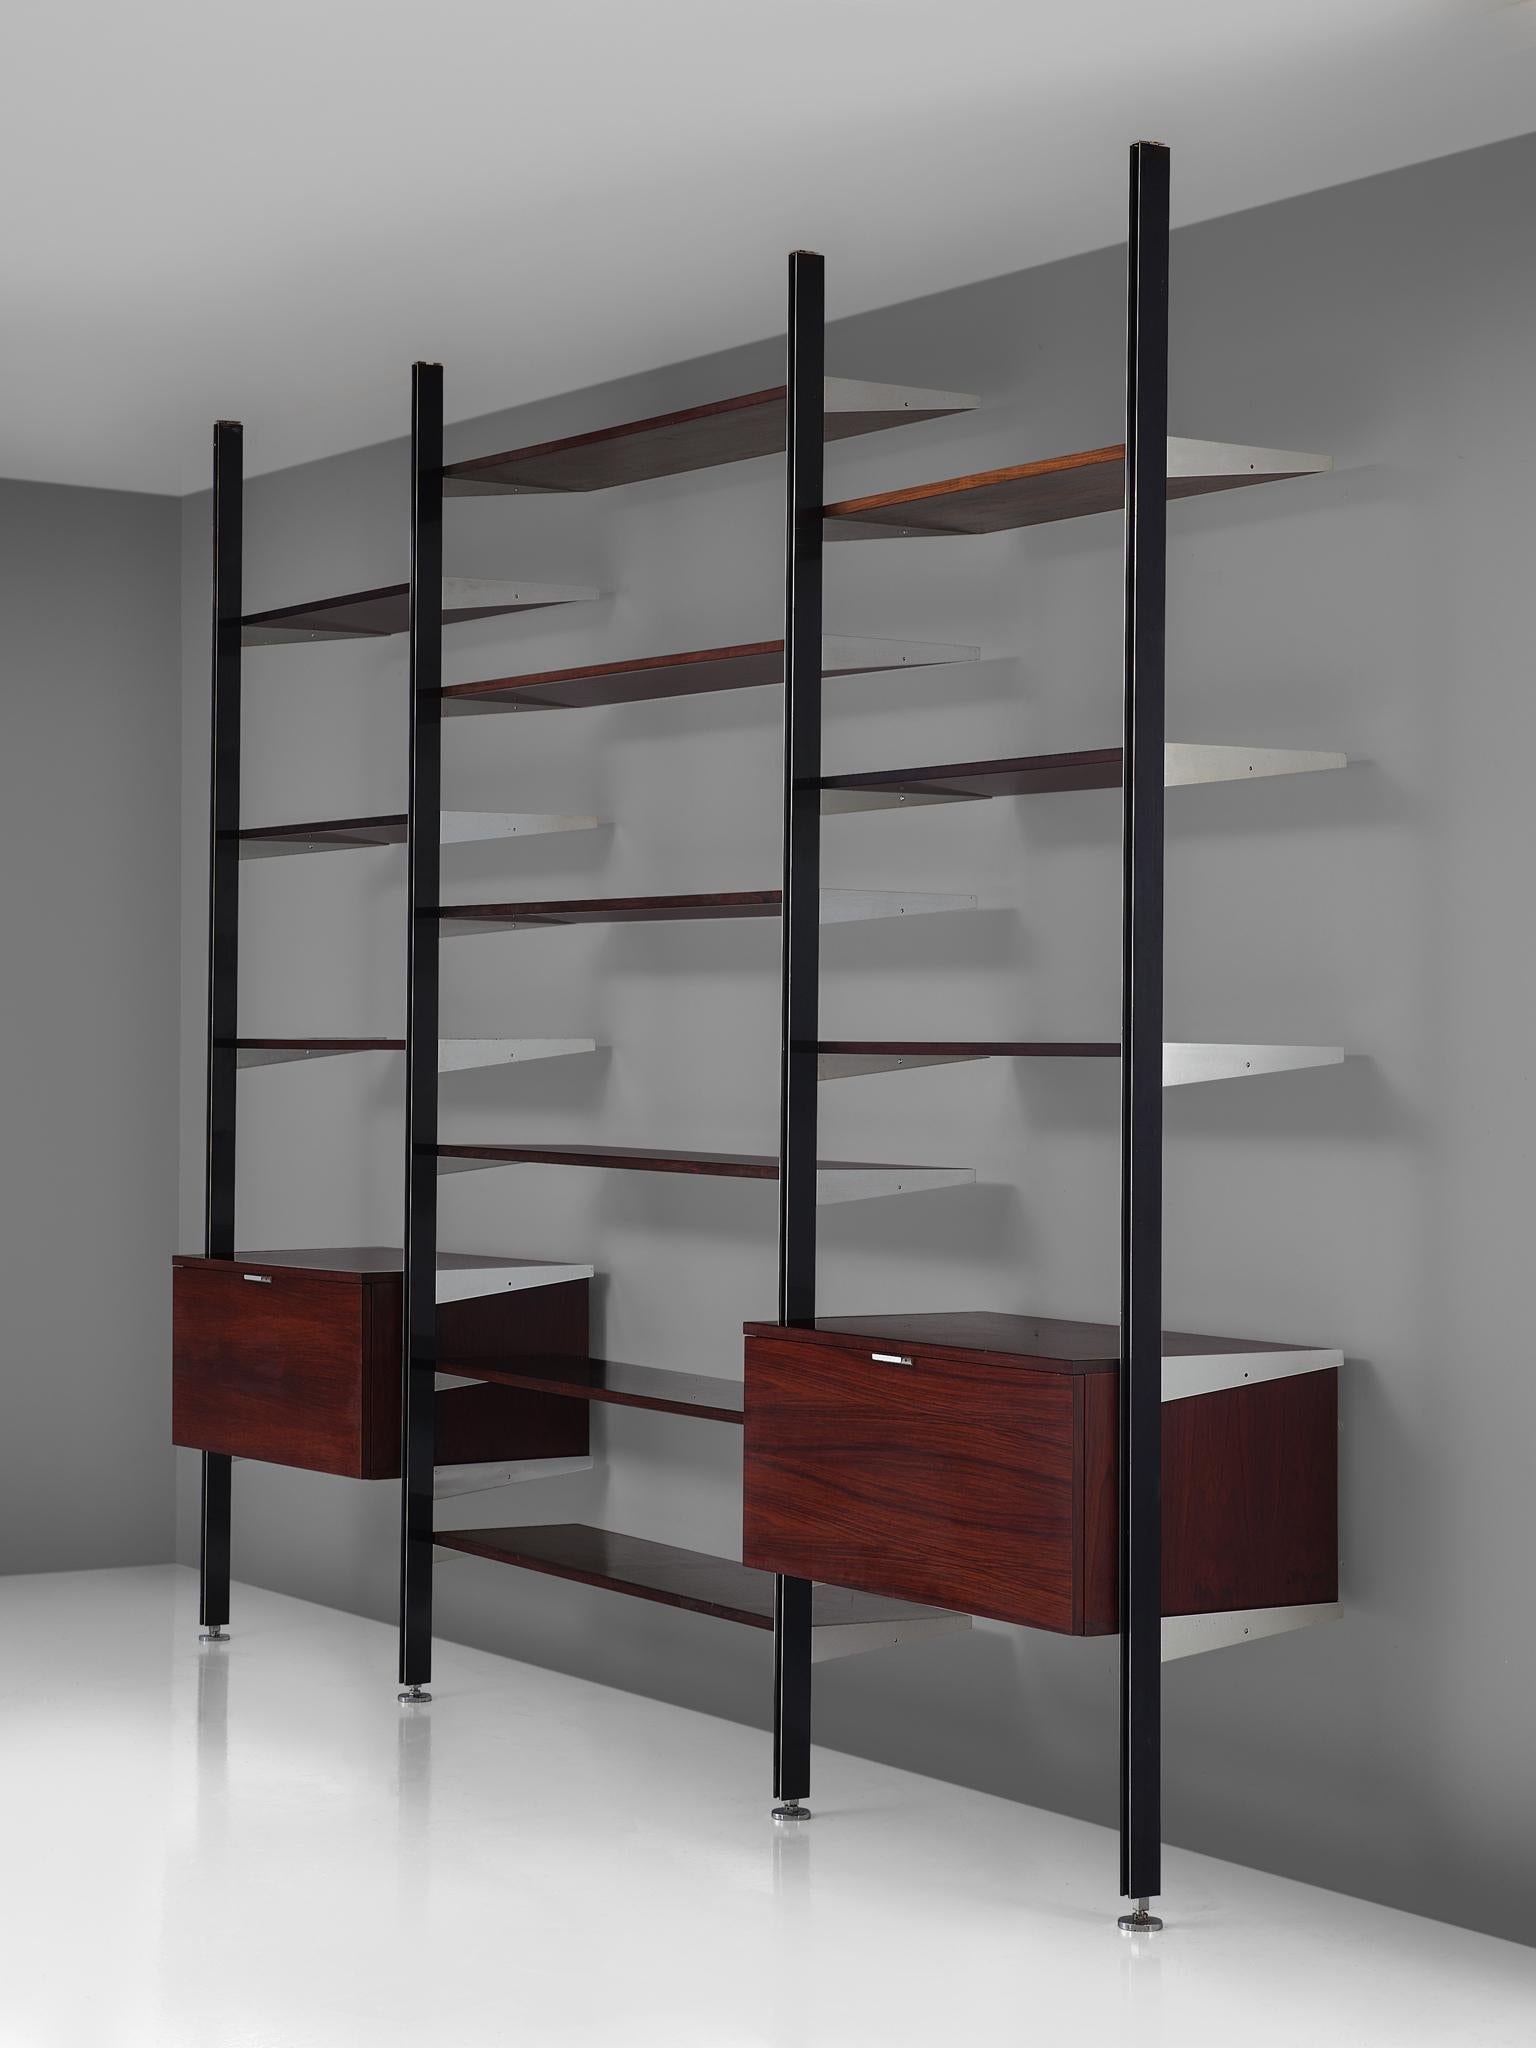 George Nelson for Mobilier International, 'CSS' wall unit, steel, rosewood and aluminum, United States, 1960s

This storage system is designed by Nelson in the 1960s. The wall unit was the first piece of furniture by Miller that made of use of